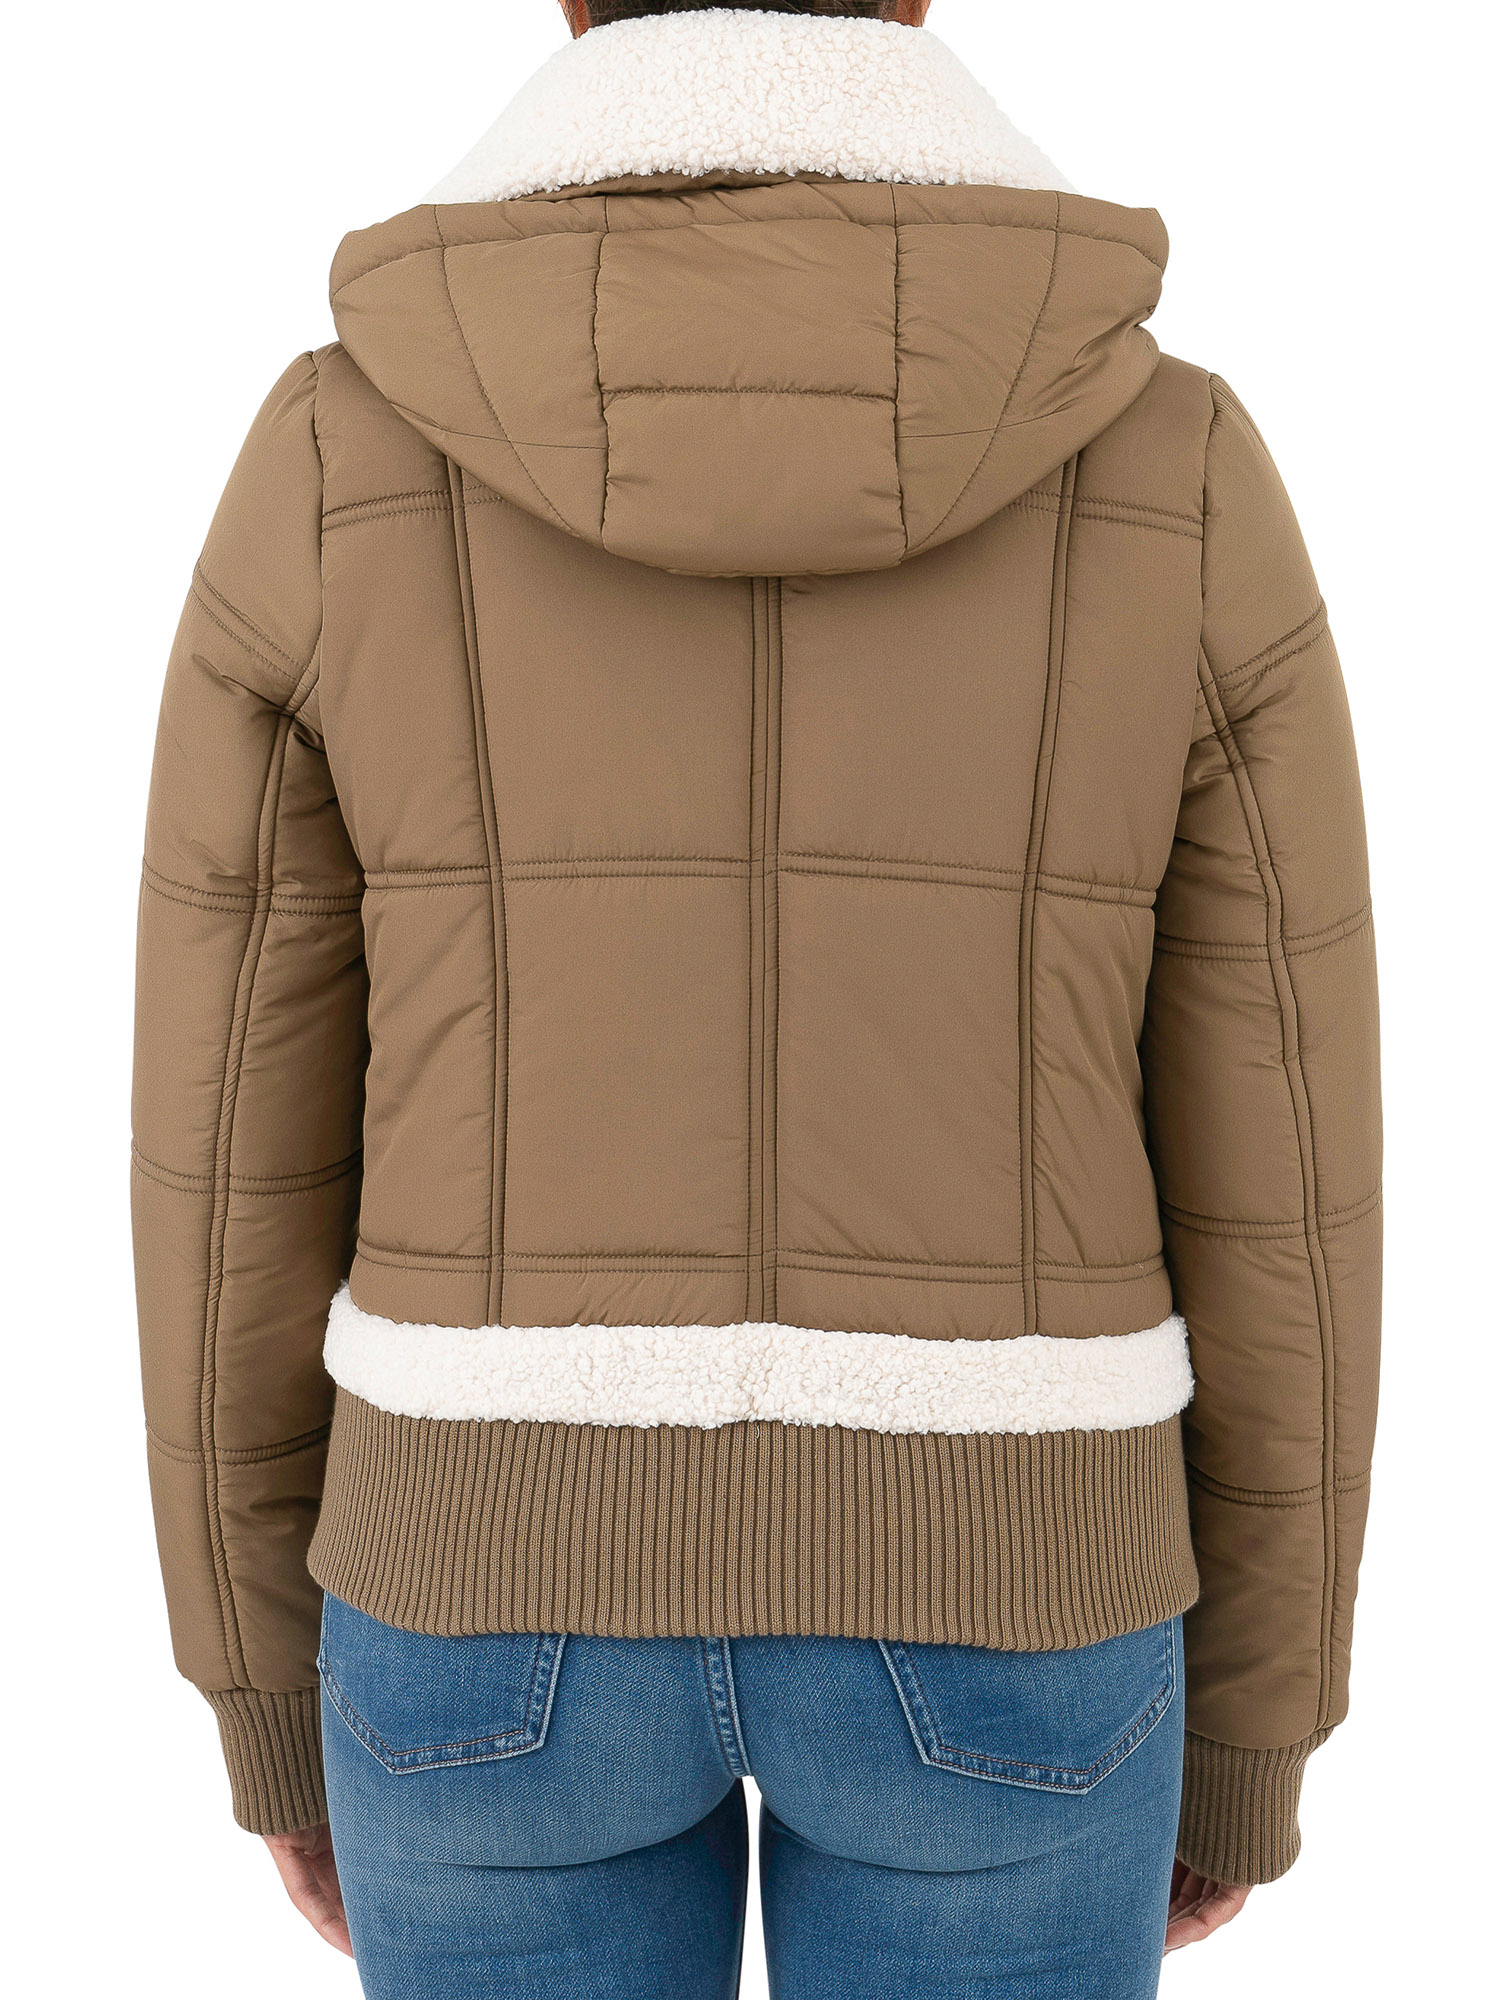 Cyn & Luca Women's Sustainable Bomber Jacket with Sherpa Trim - image 3 of 6